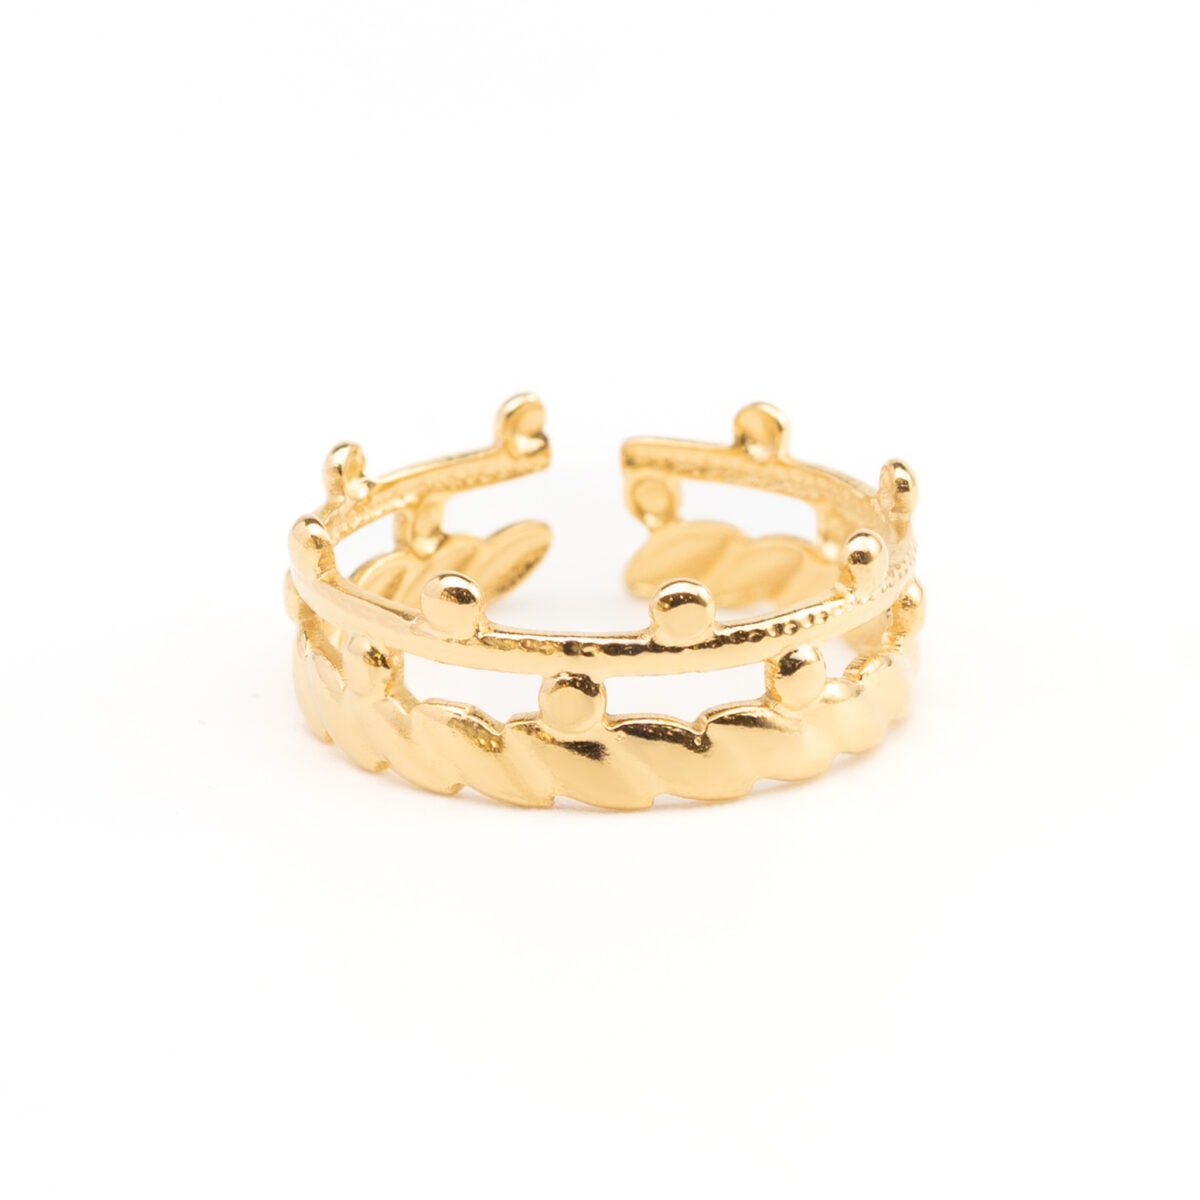 https://m.clubbella.co/product/regal-ring/ Regal RIng (2)